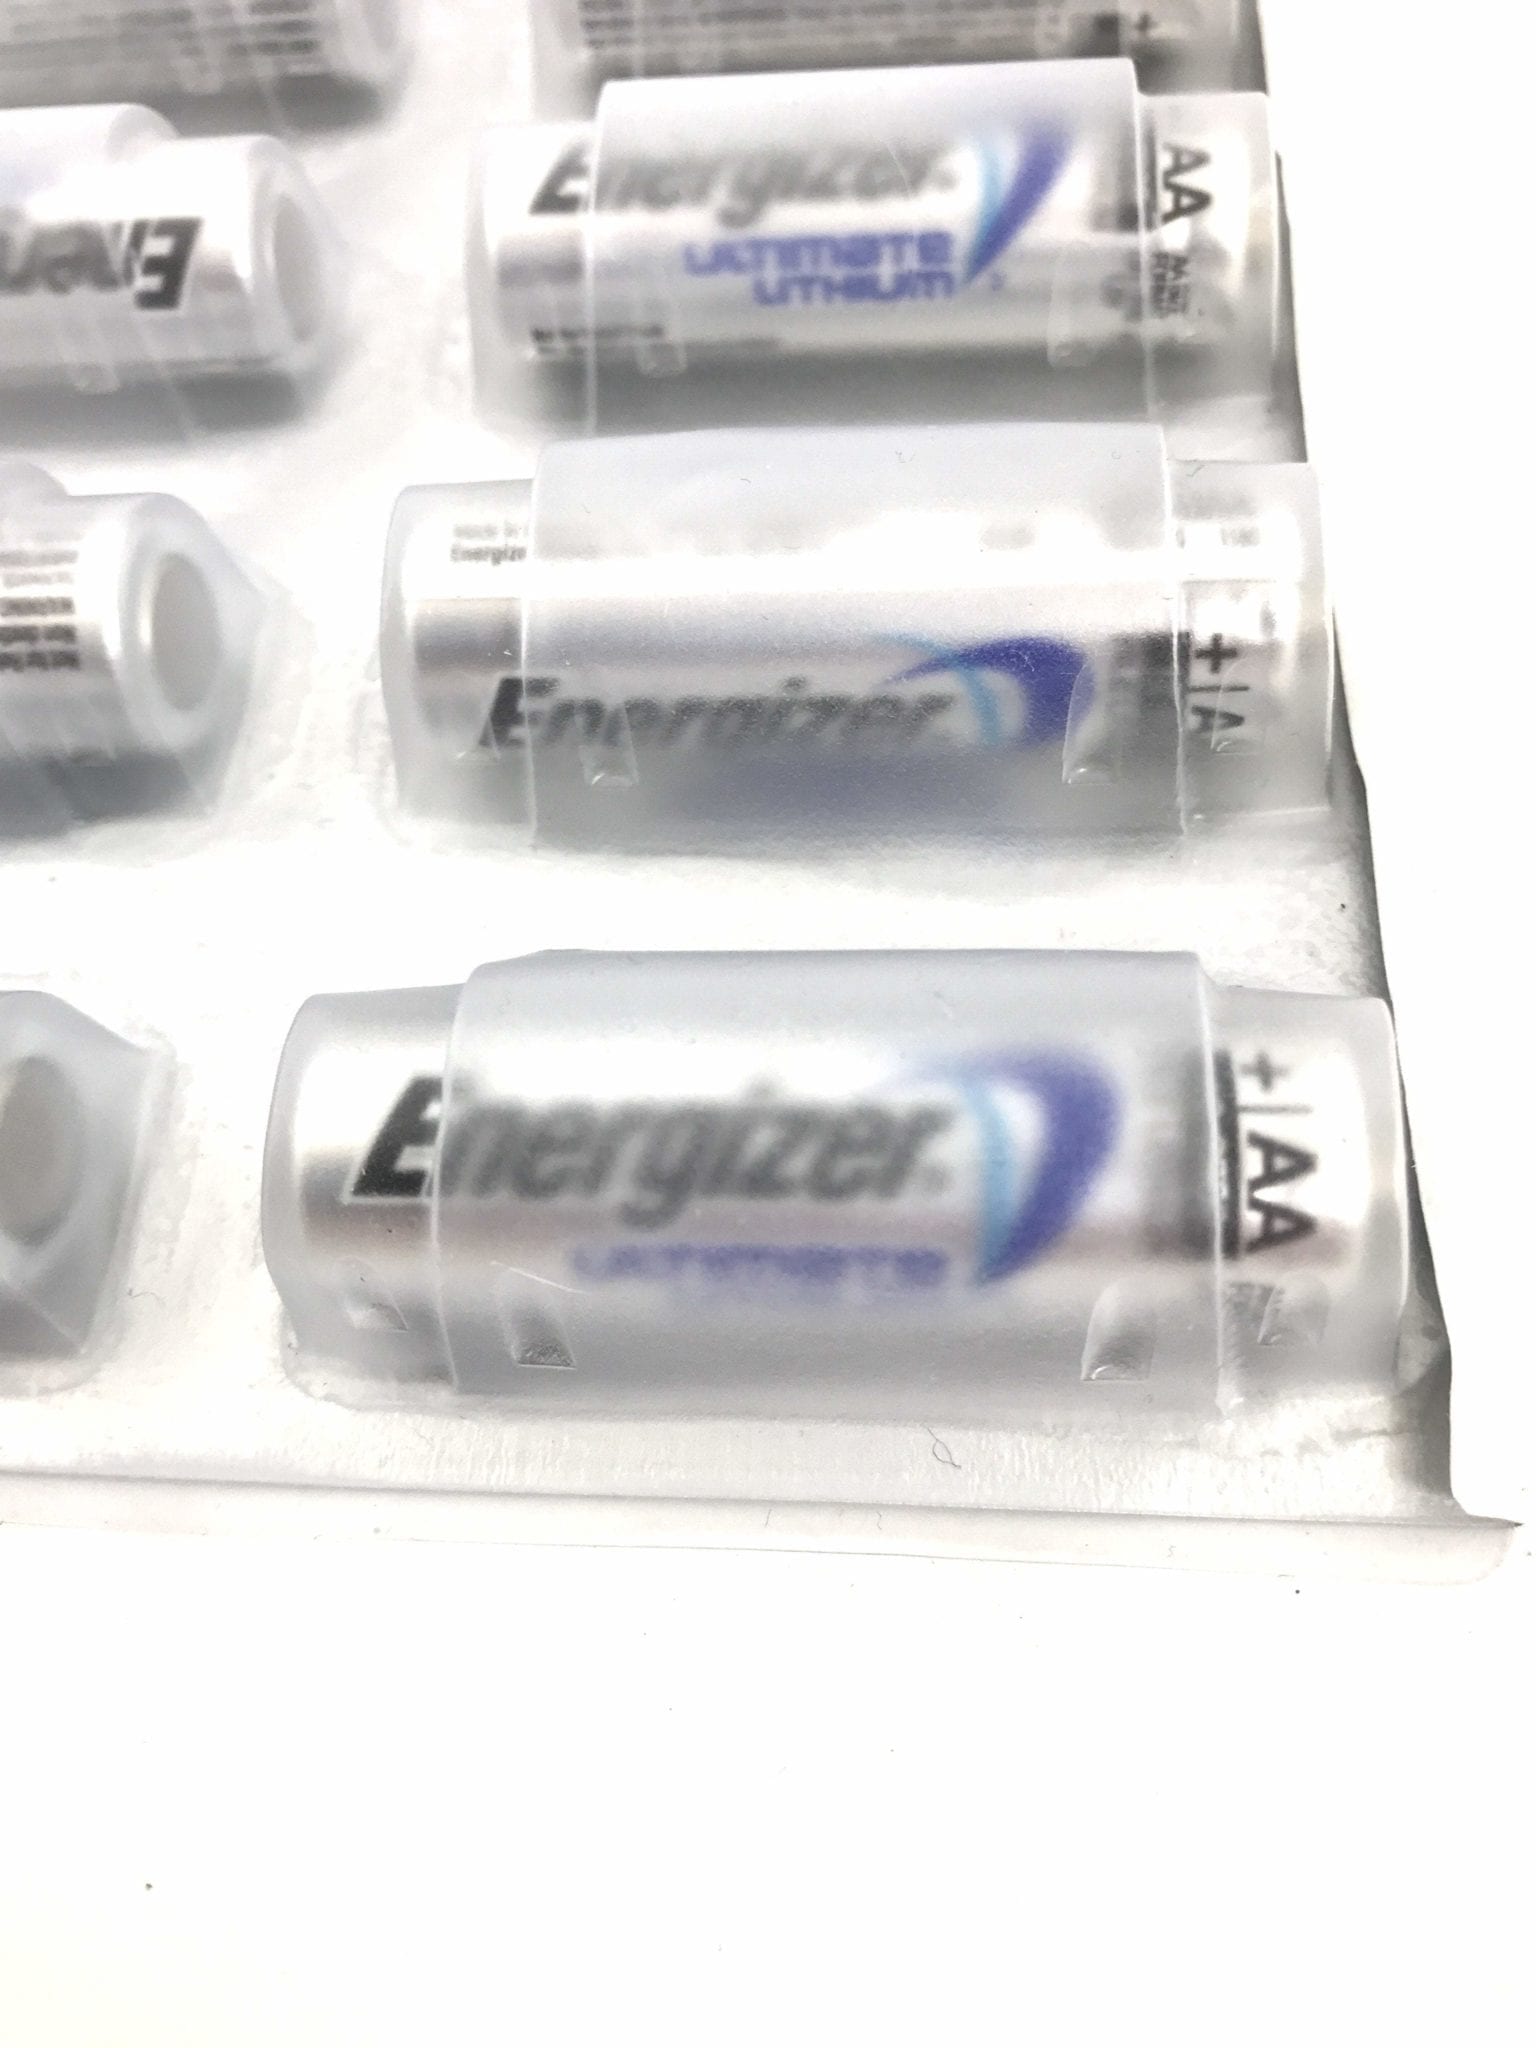 Army Surplus Energizer Ultimate Lithium AA Batteries [Genuine Issue]